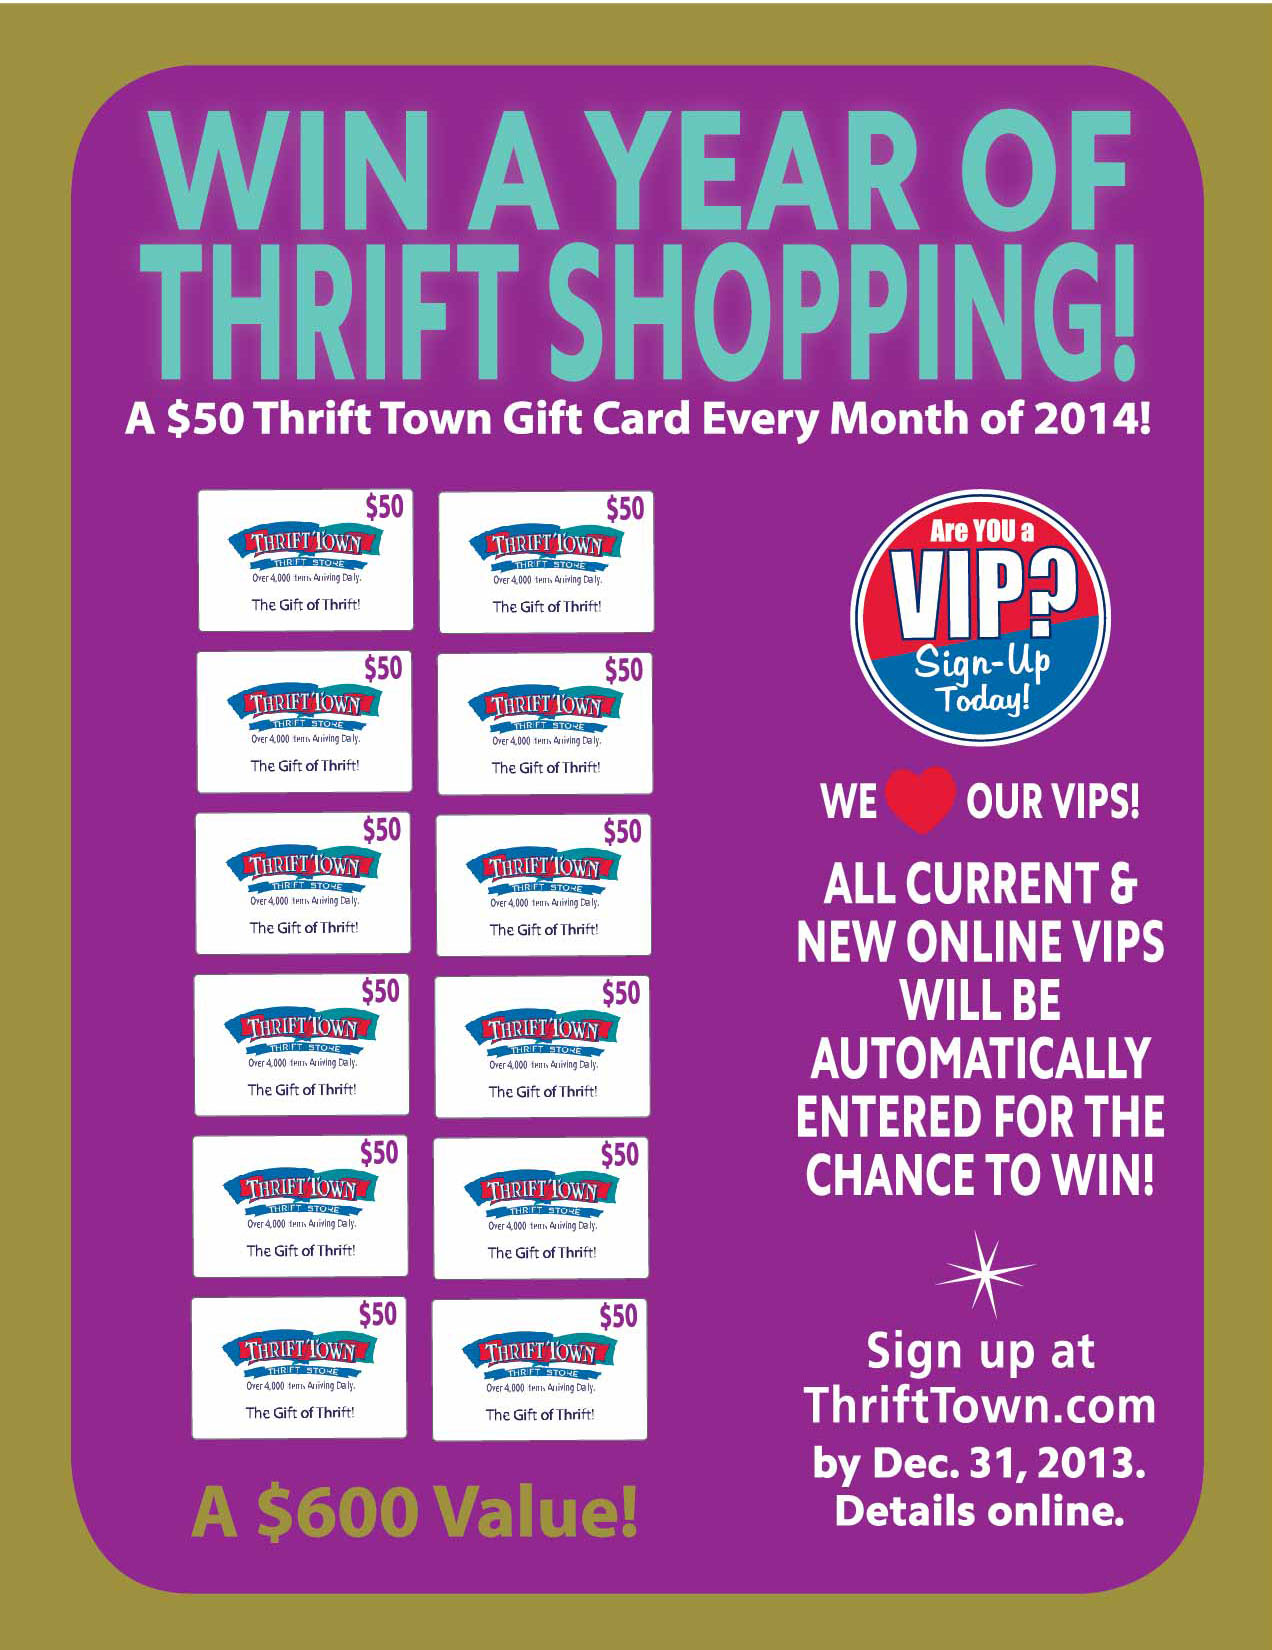 VIP's Automatically Entered to Win a Year of Free Thrifting from Thrift Town